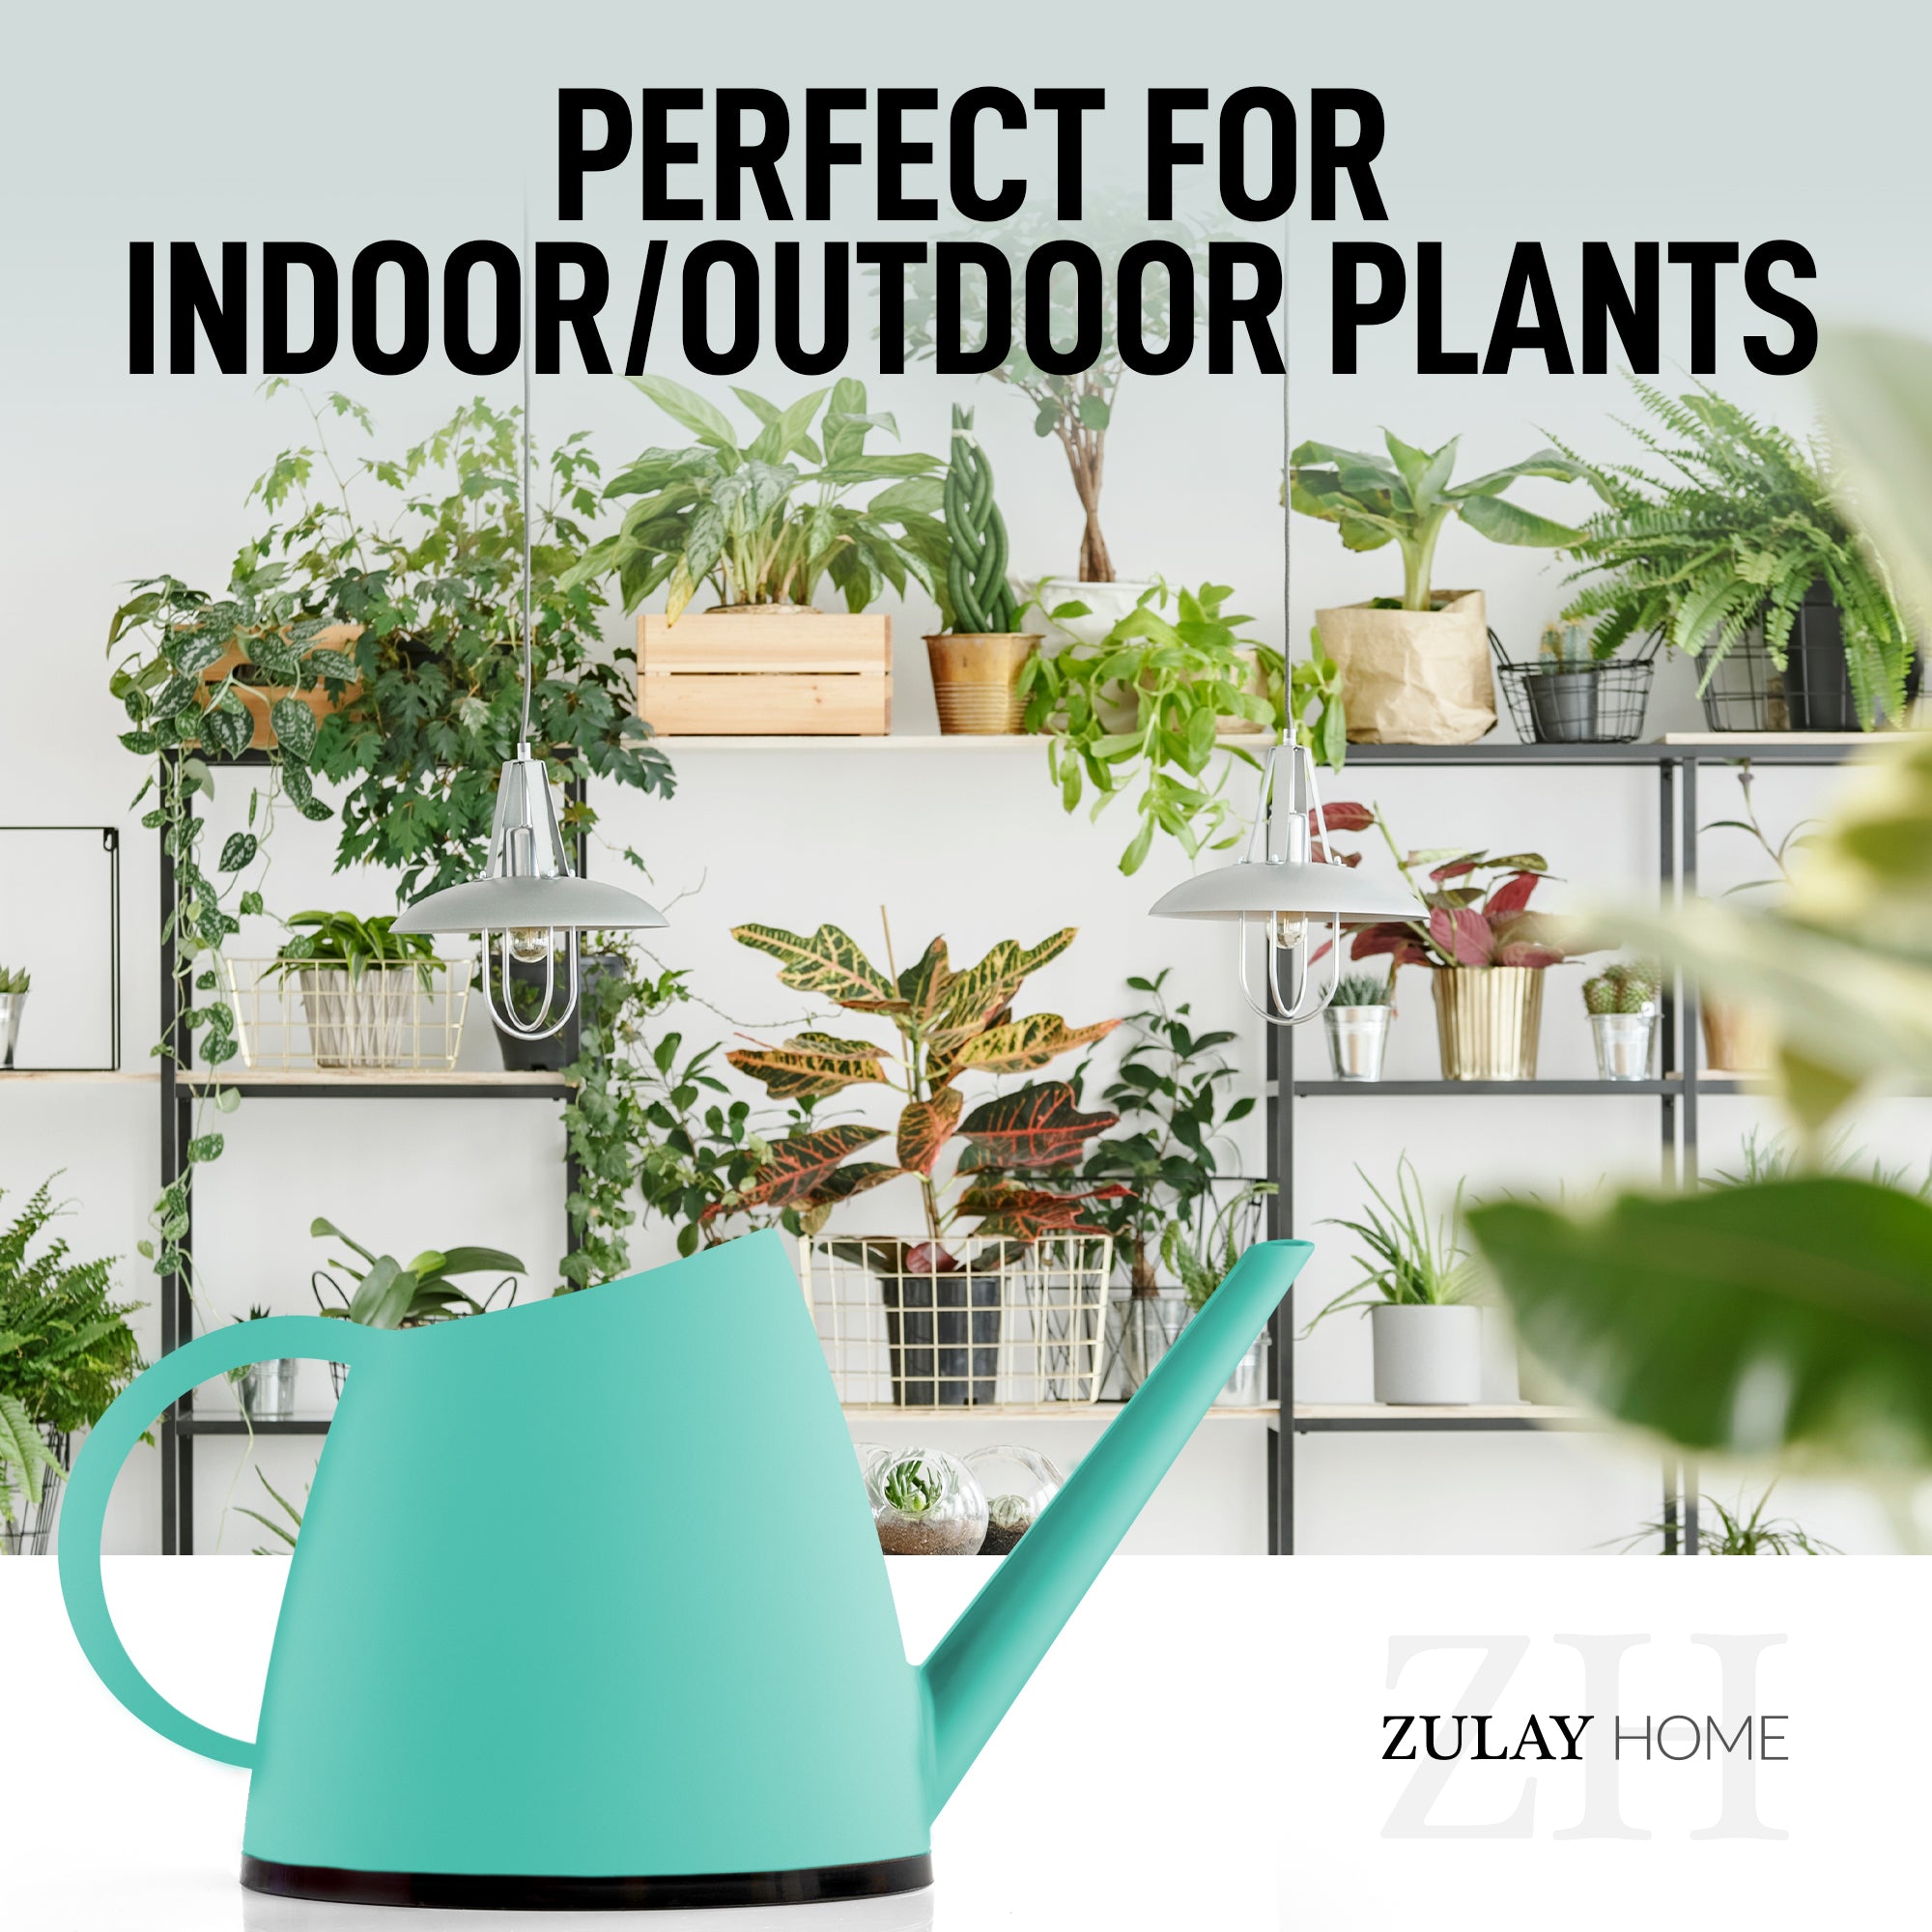 Zulay Home Small Watering Can from Zulay Kitchen